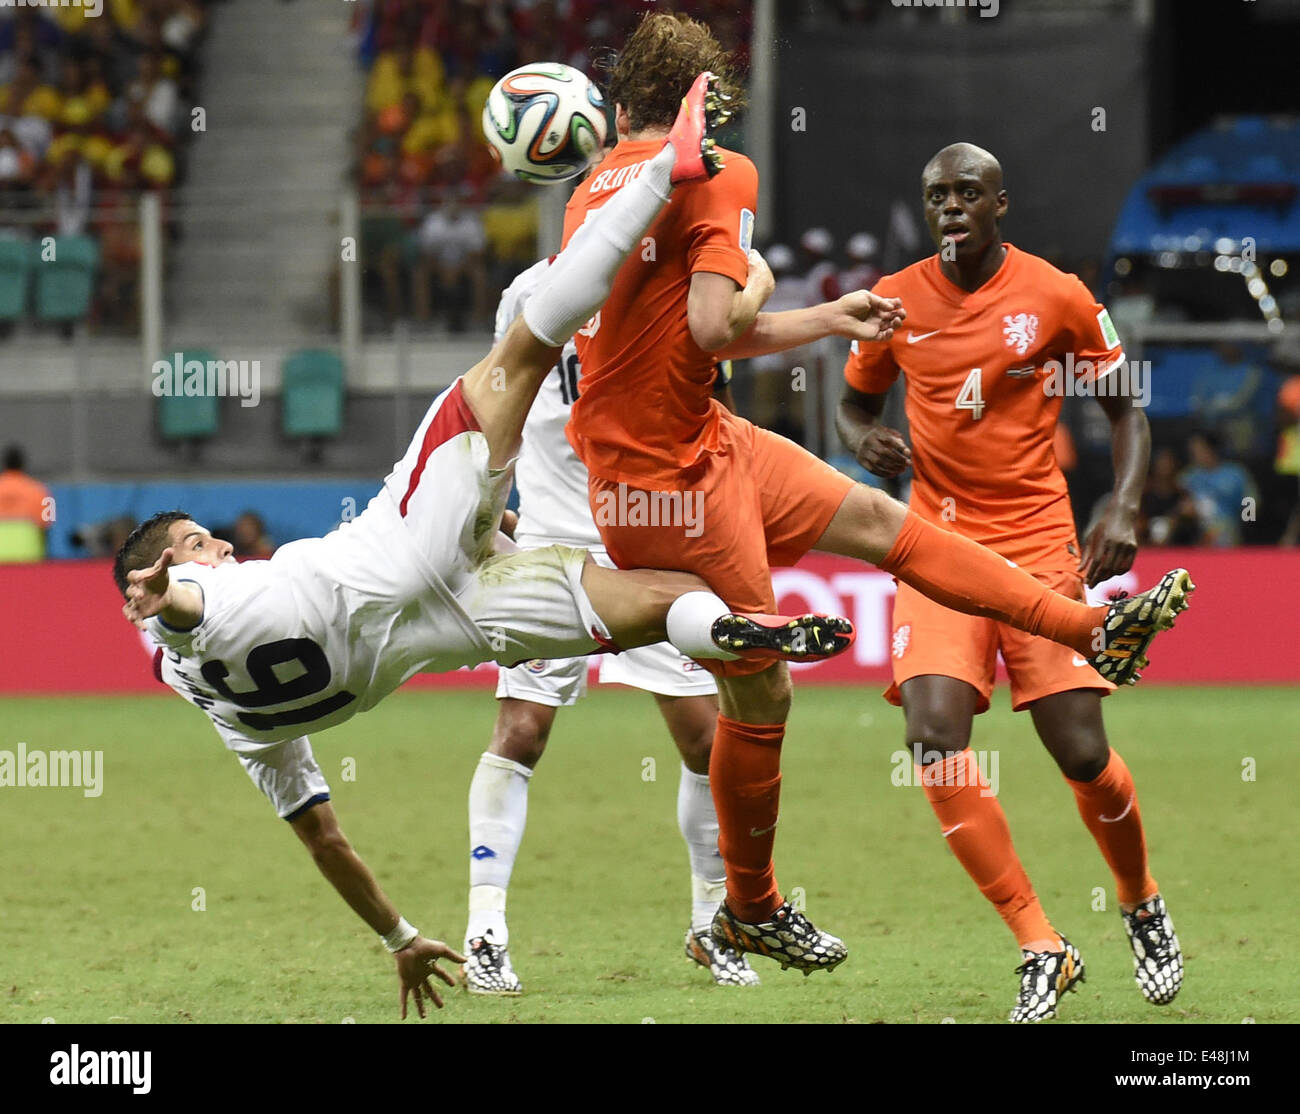 Salvador, Brazil. 5th July, 2014. Costa Rica's Christian Gamboa (L) attempts an overhead kick during a quarter-finals match between Netherlands and Costa Rica of 2014 FIFA World Cup at the Arena Fonte Nova Stadium in Salvador, Brazil, on July 5, 2014. Credit:  Lui Siu Wai/Xinhua/Alamy Live News Stock Photo